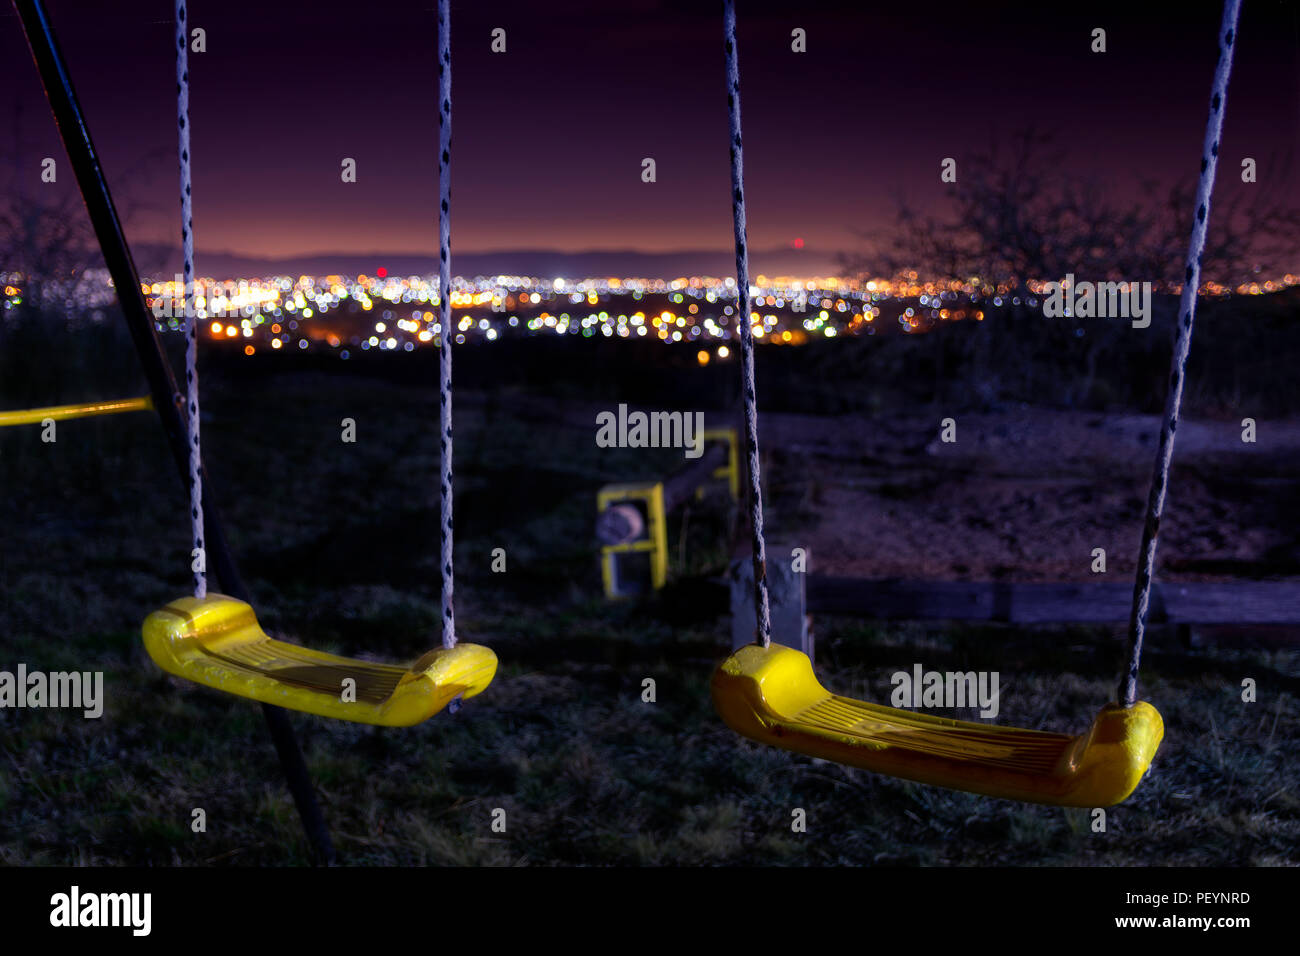 Empty swings on the night with city lights blurred on the background in a winter night Stock Photo